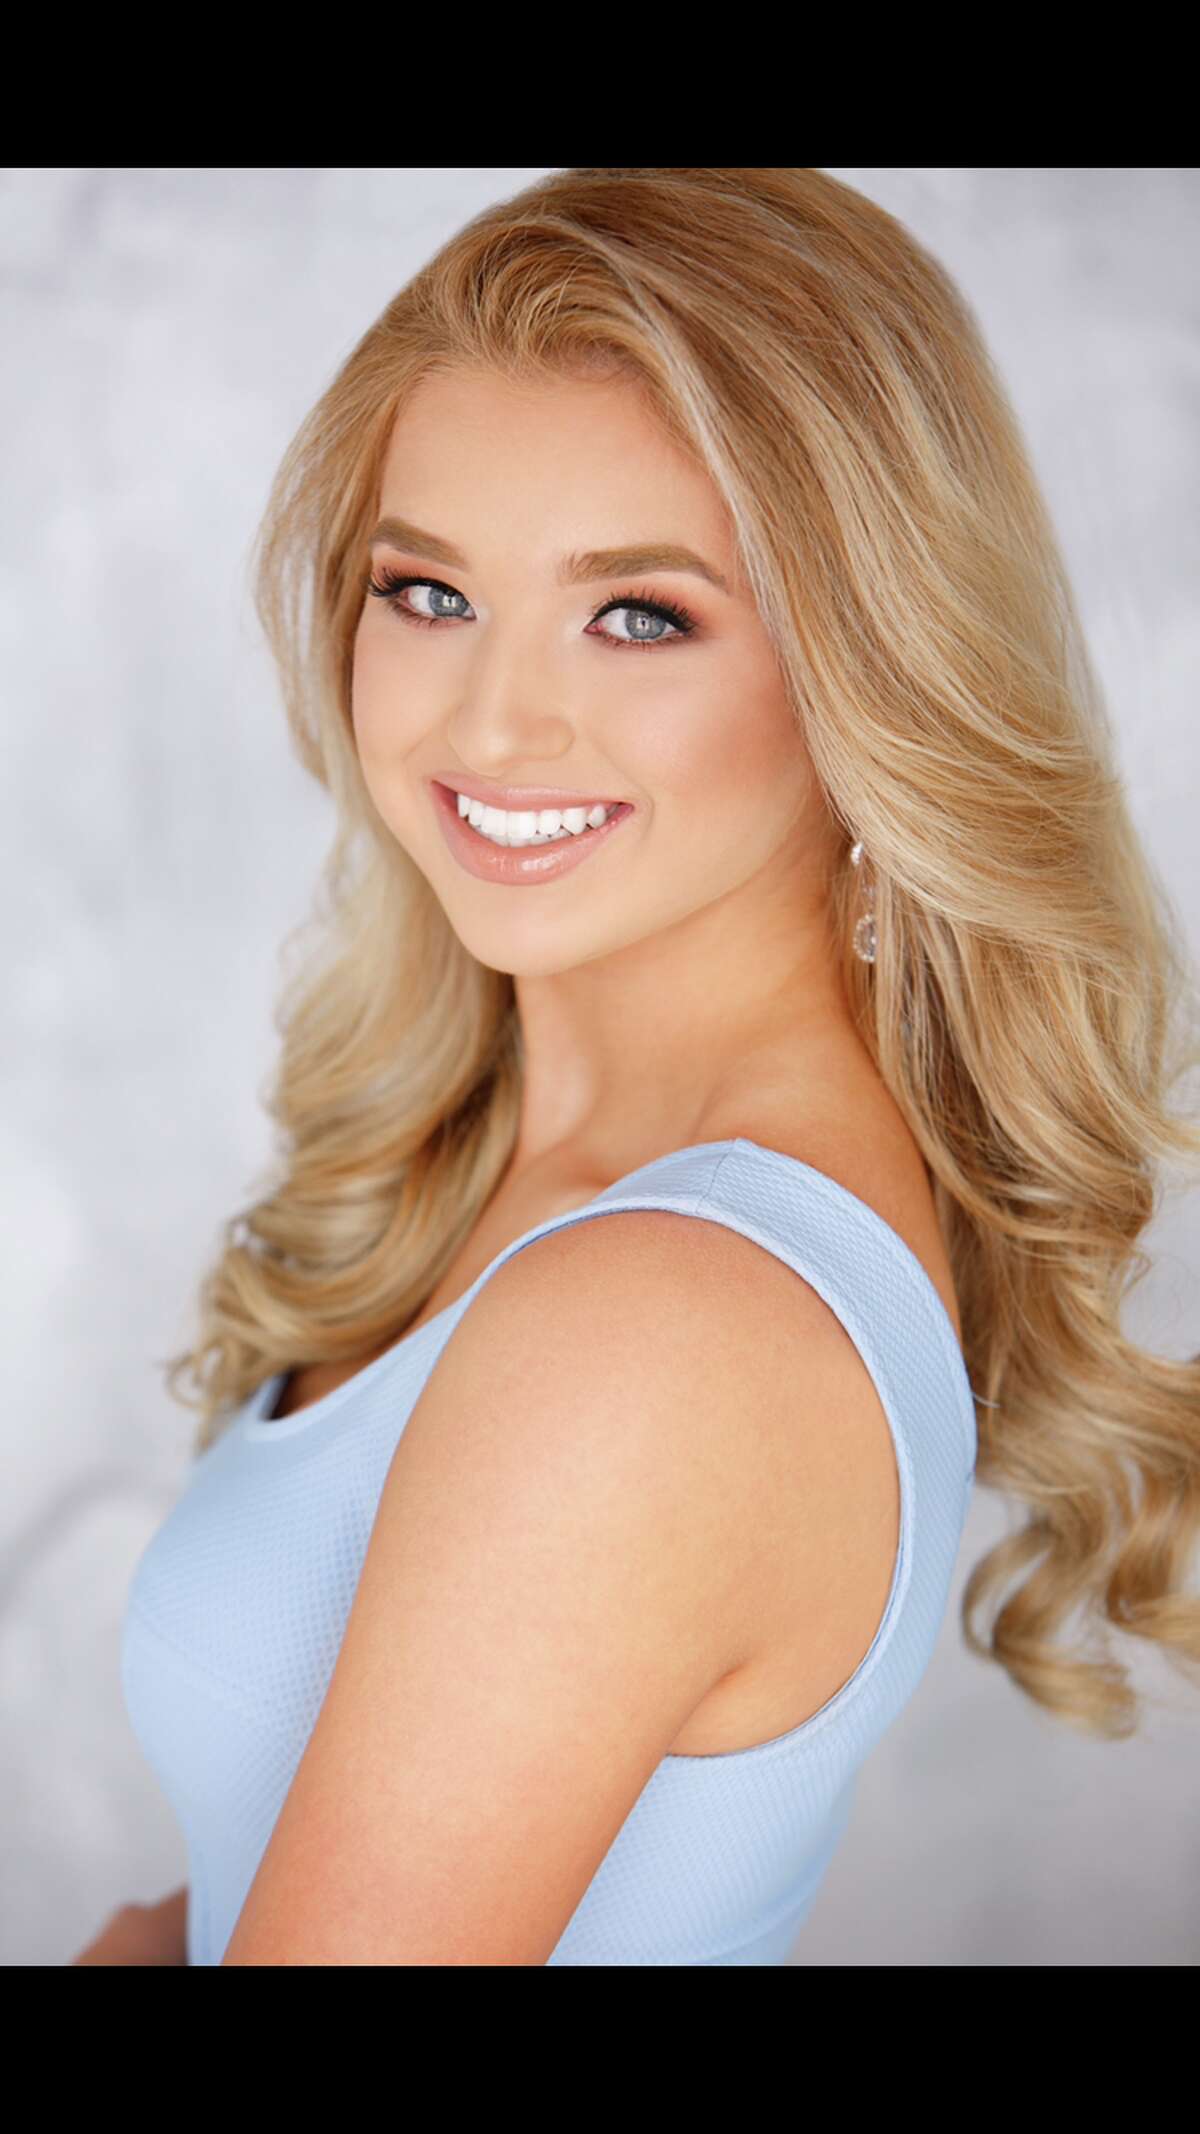 Laredo teen crowned Miss Texas Teen USA 2020 in state pageant